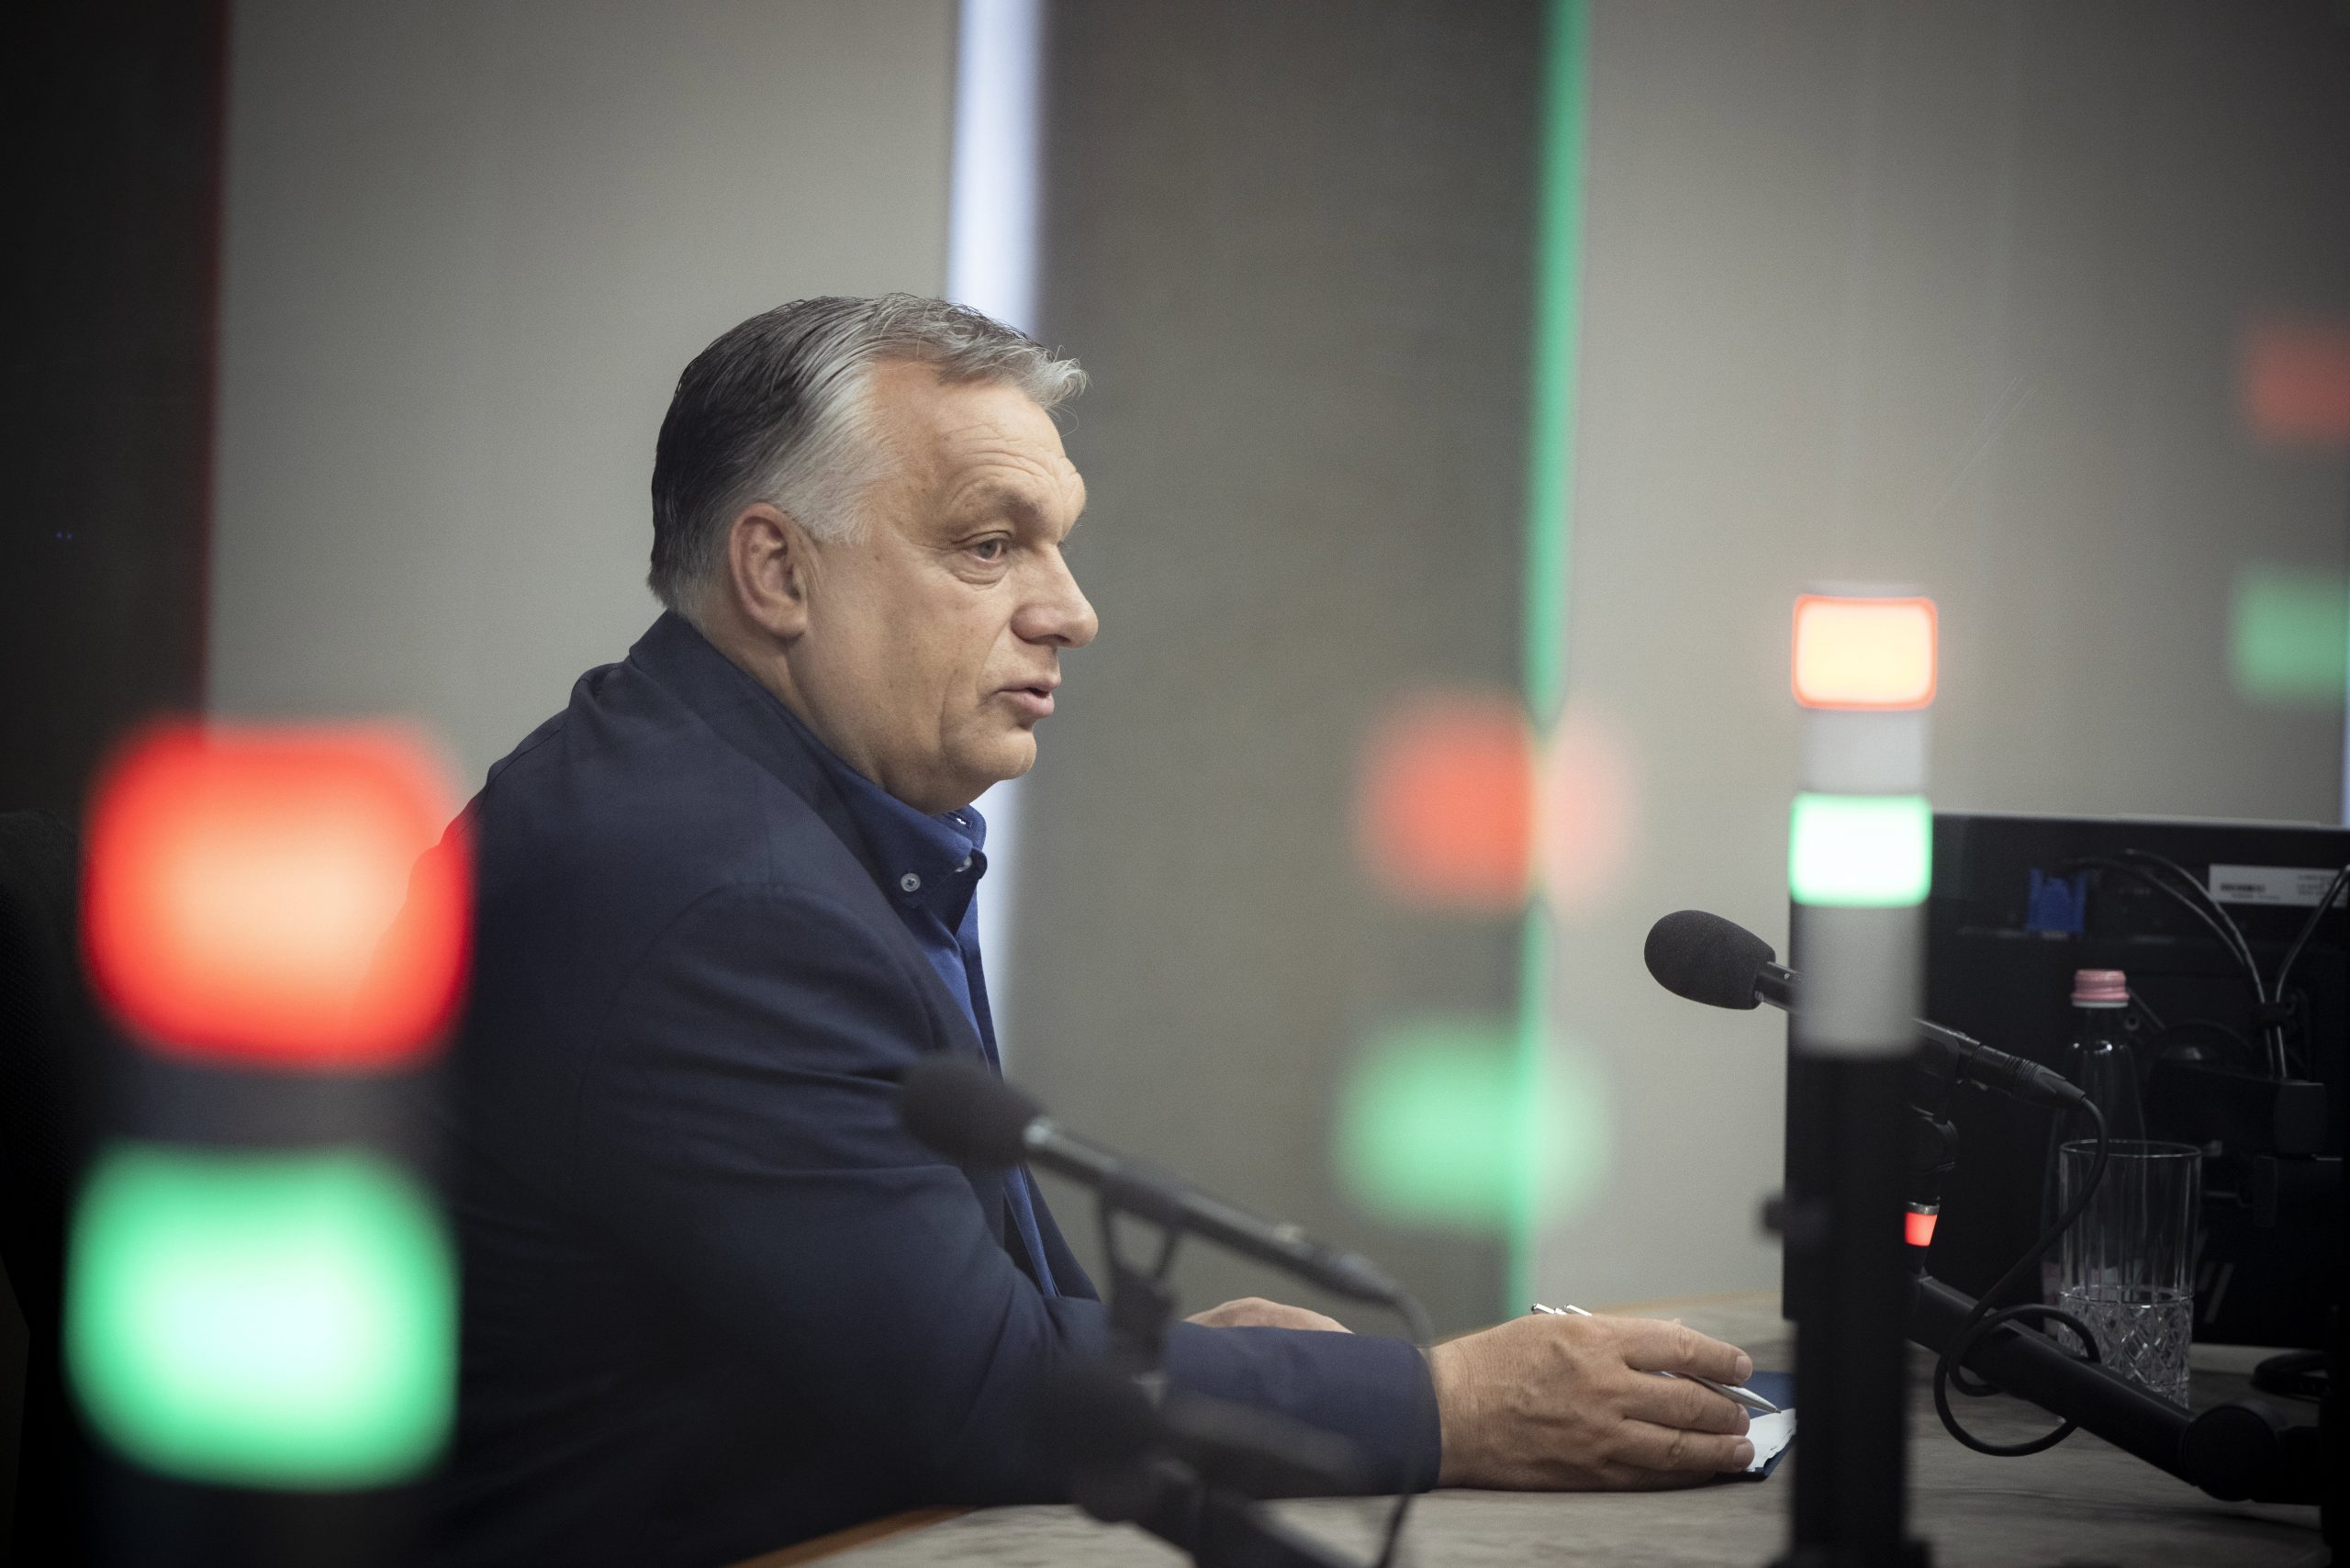 Prime Minister Orbán Confirms that Households Will Still Pay Capped Energy Bills